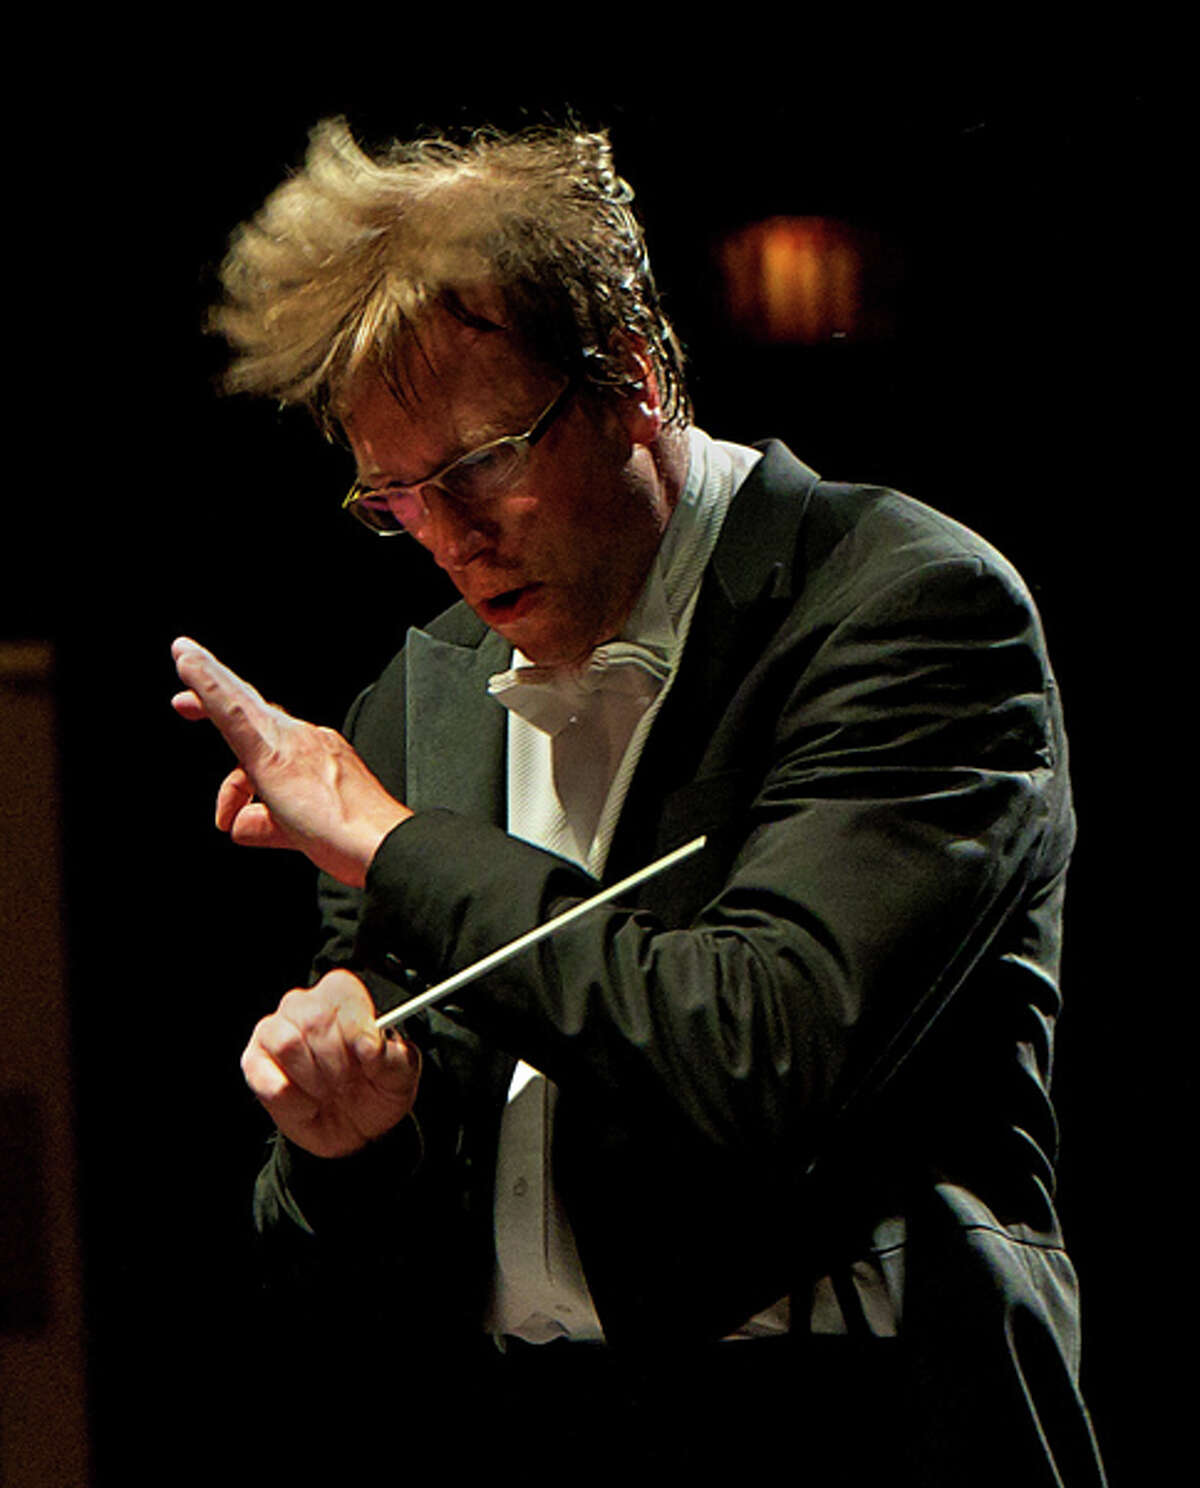 Eckart Preu will lead the Stamford Symphony and the Greenwich Choral Society in a weekend of performances Saturday and Sunday, March 23 to 24, 201, at the Palace Theatre in Stamford, Conn. On the program will be Beethoven.